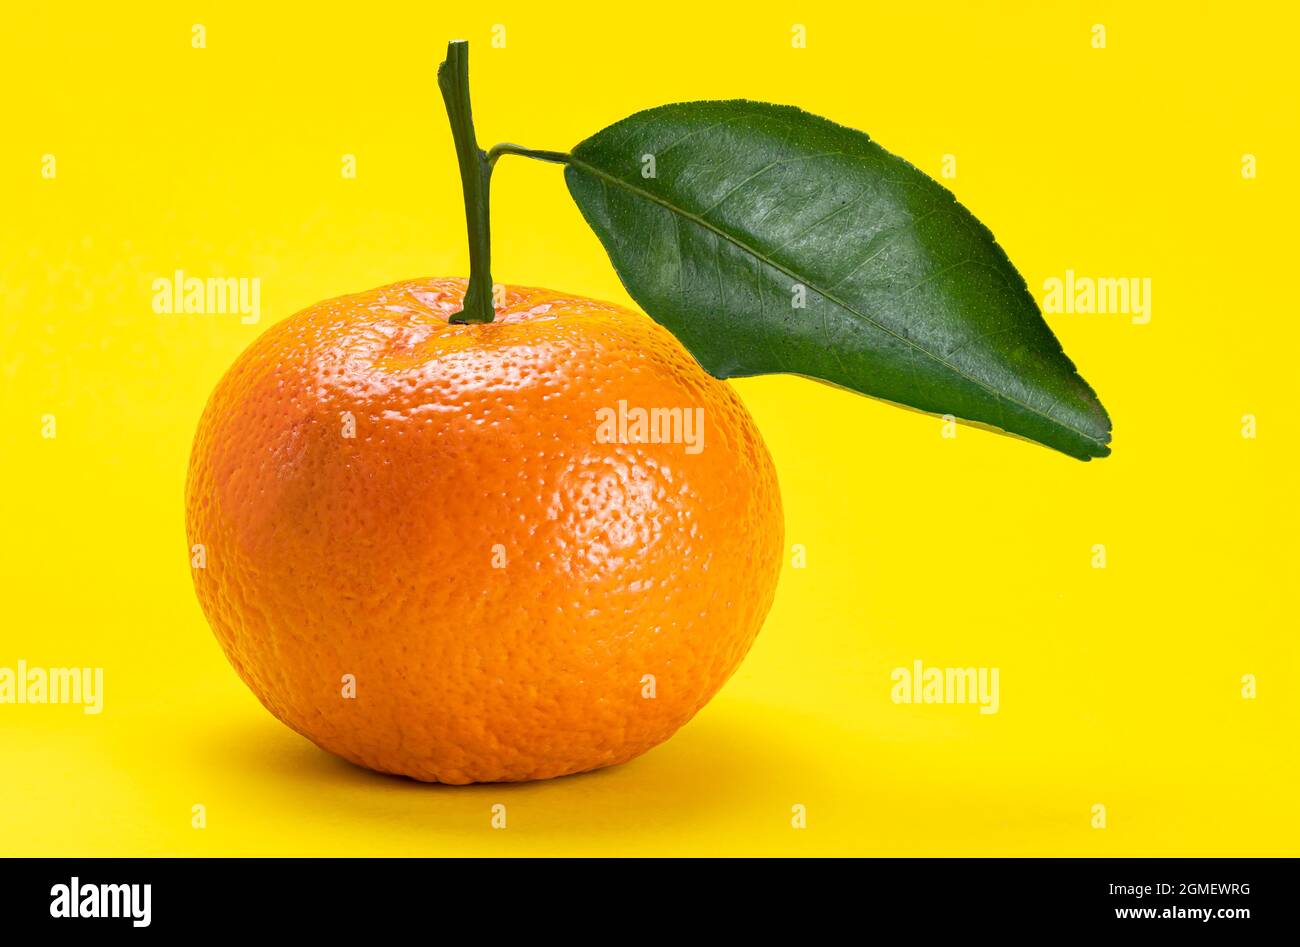 Side view of sweet mandarin orange with leaf isolated on yellow background with clipping path. Stock Photo